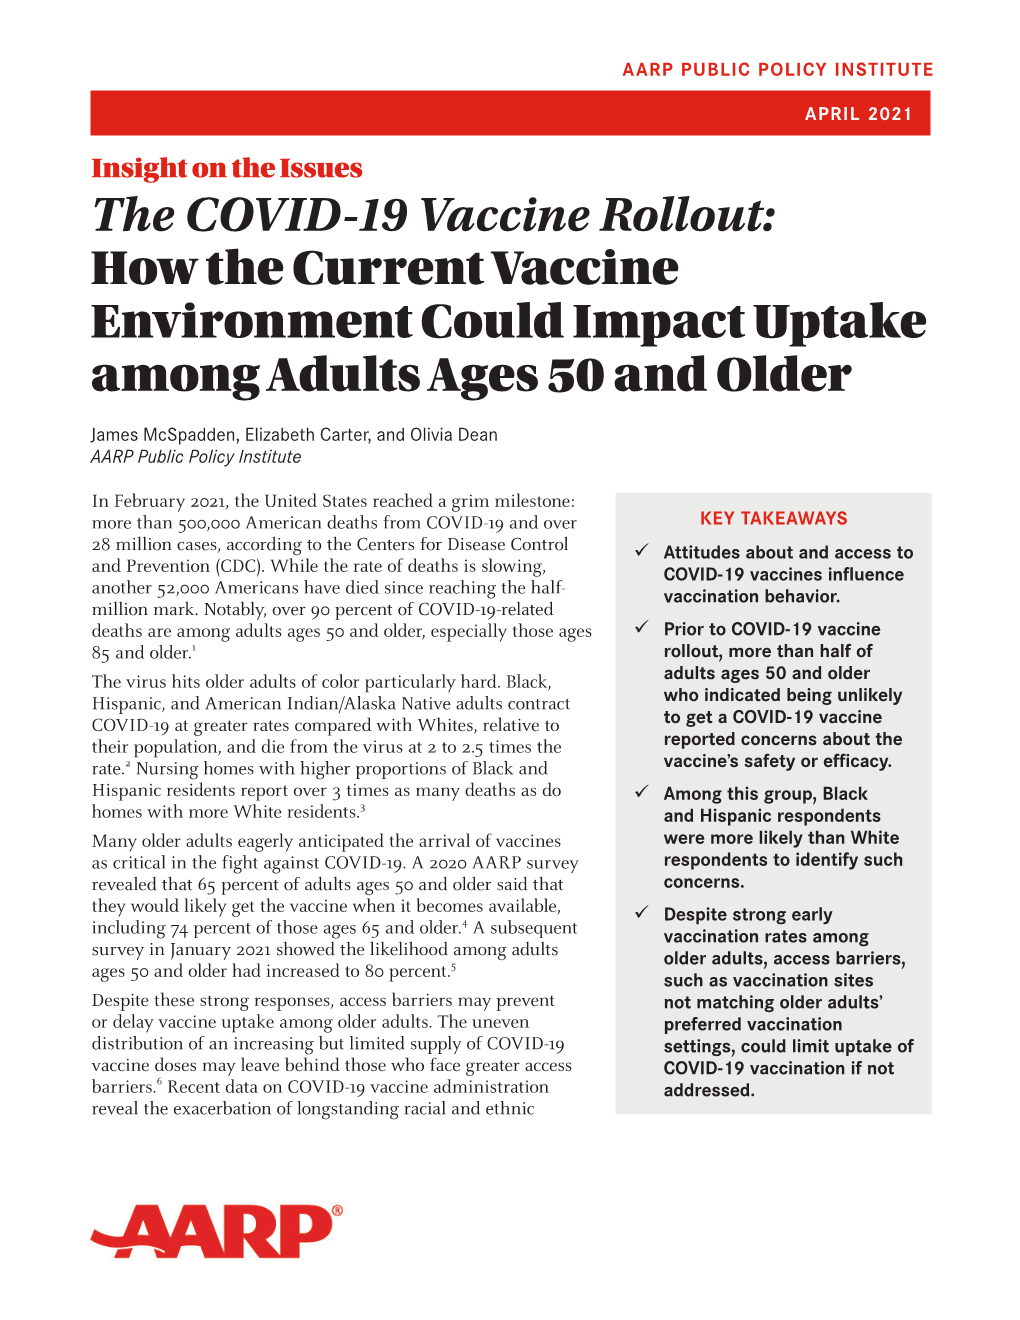 How the Current Vaccine Environment Could Impact Uptake Among Adults Ages 50 and Older